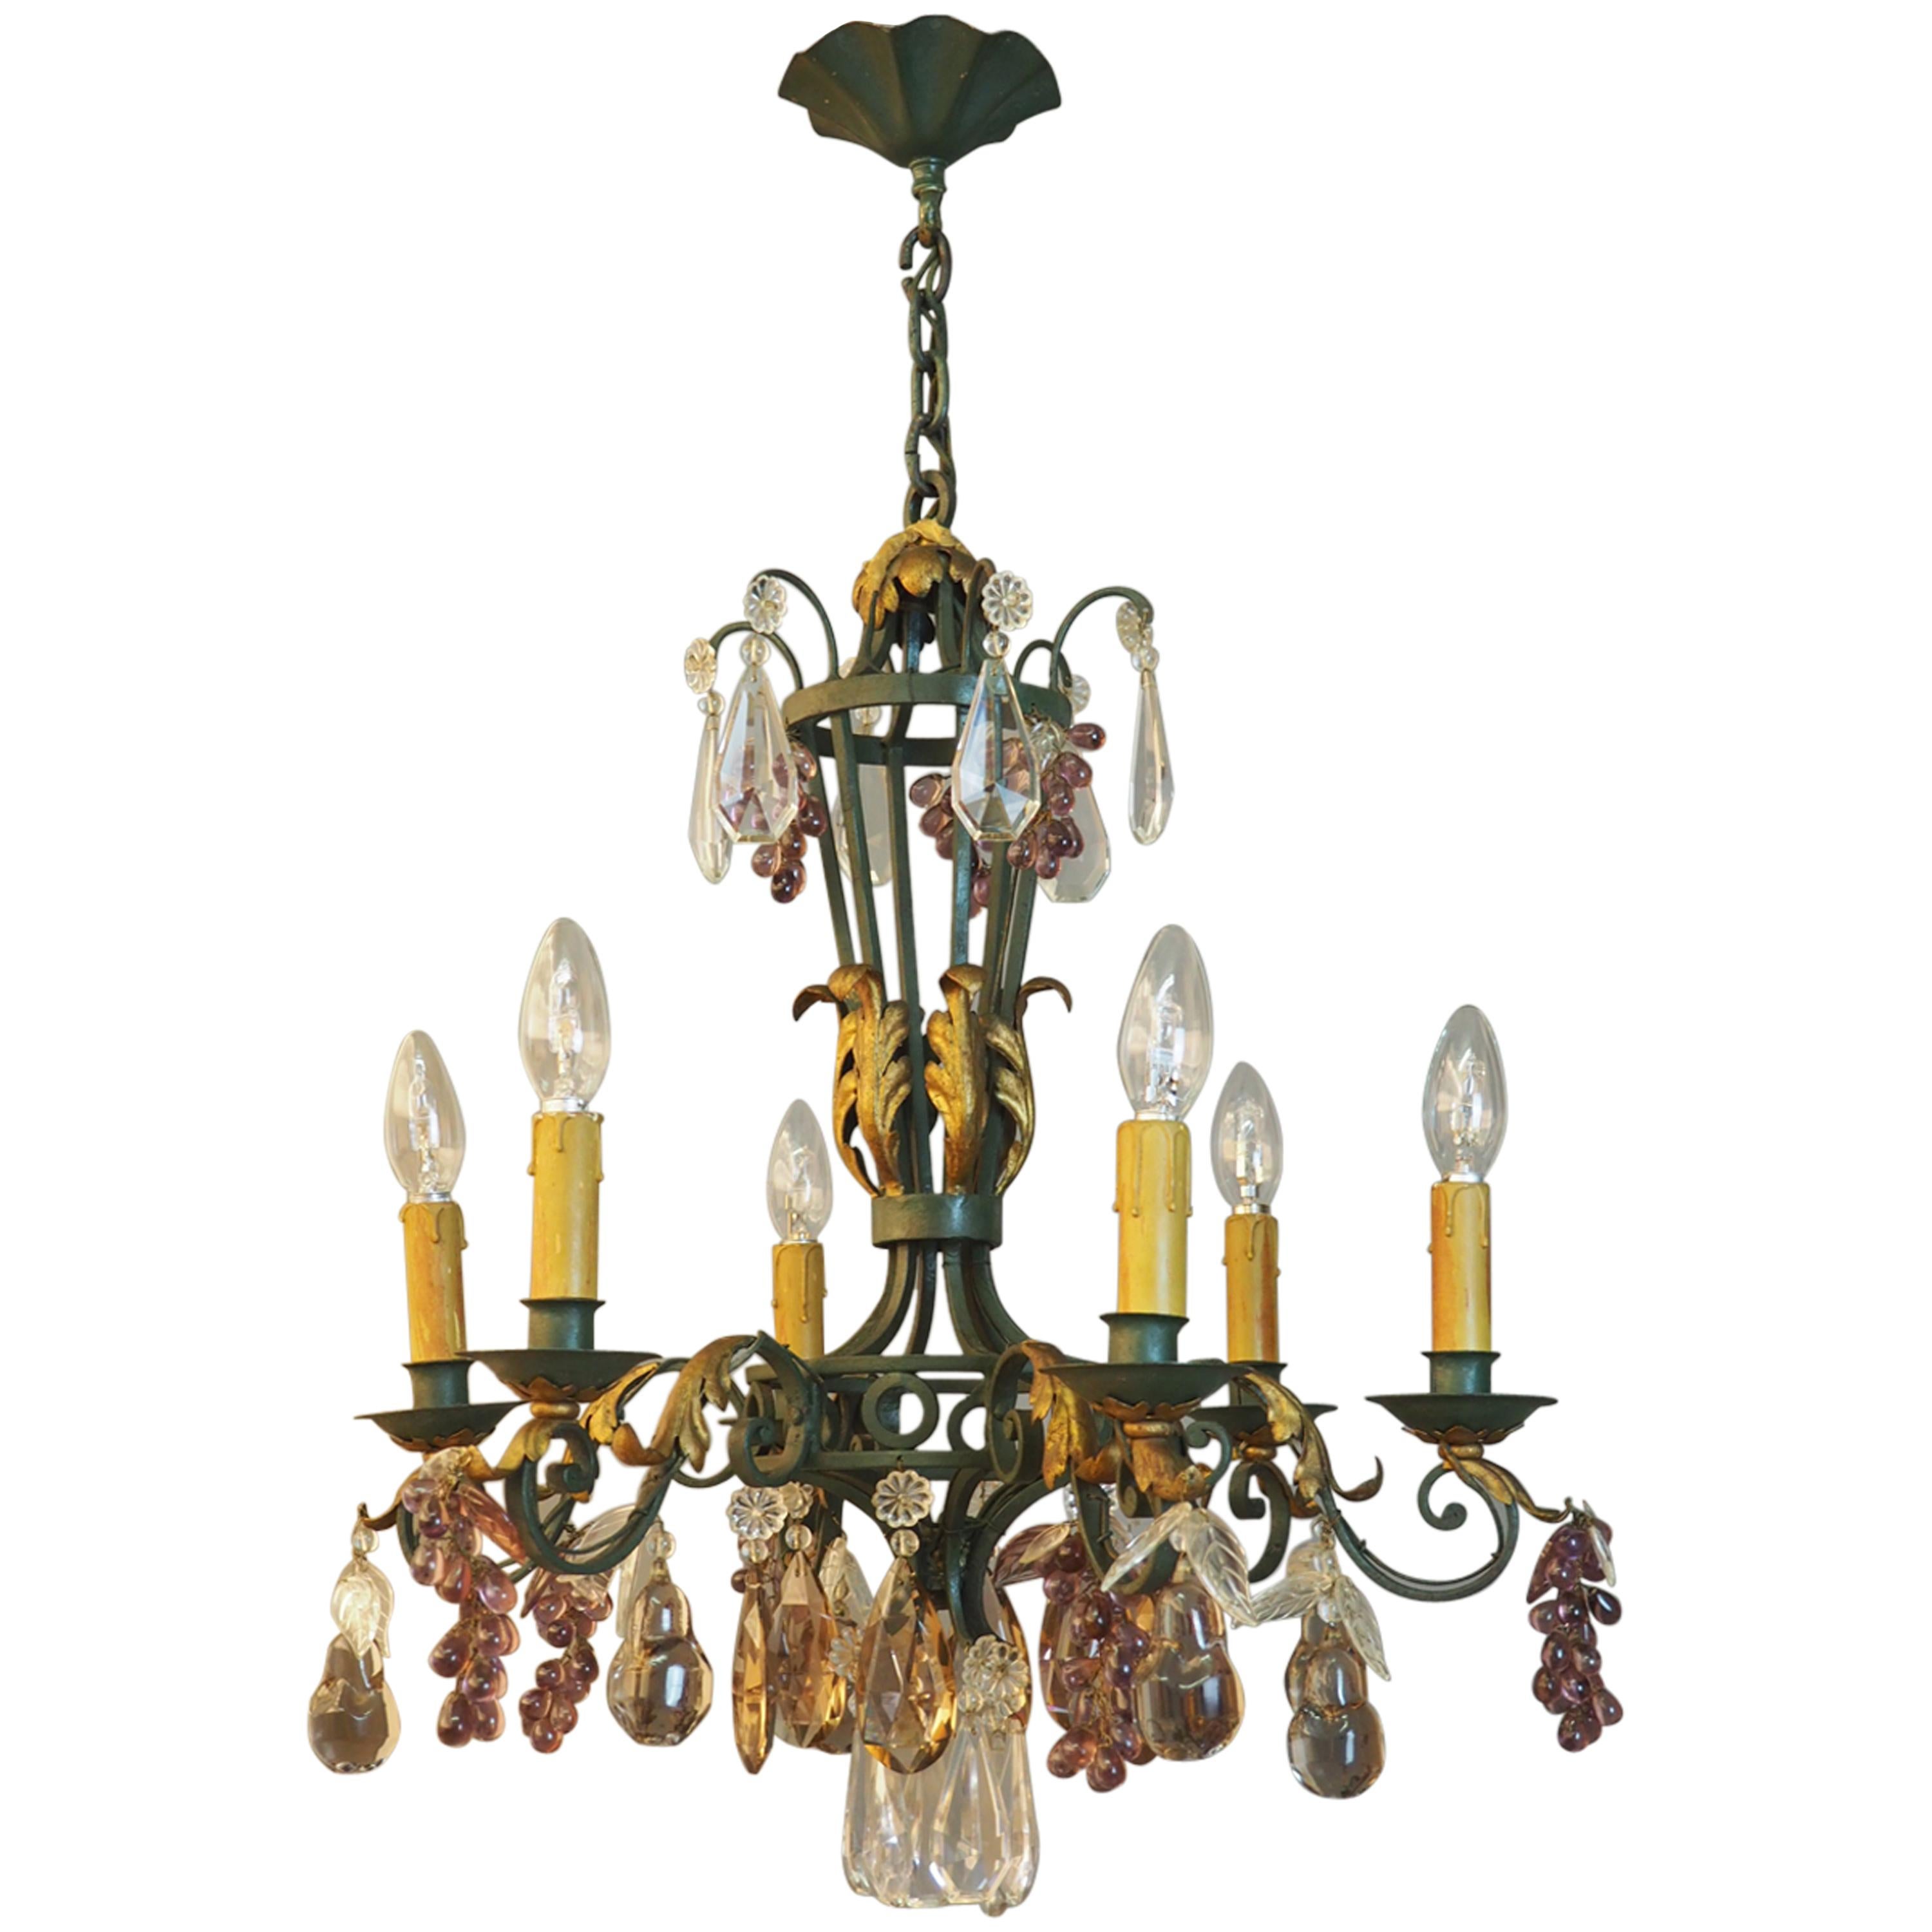 Green Painted and Gilt Wrought Iron Amethyst Chandelier with Fruits, 1900s For Sale